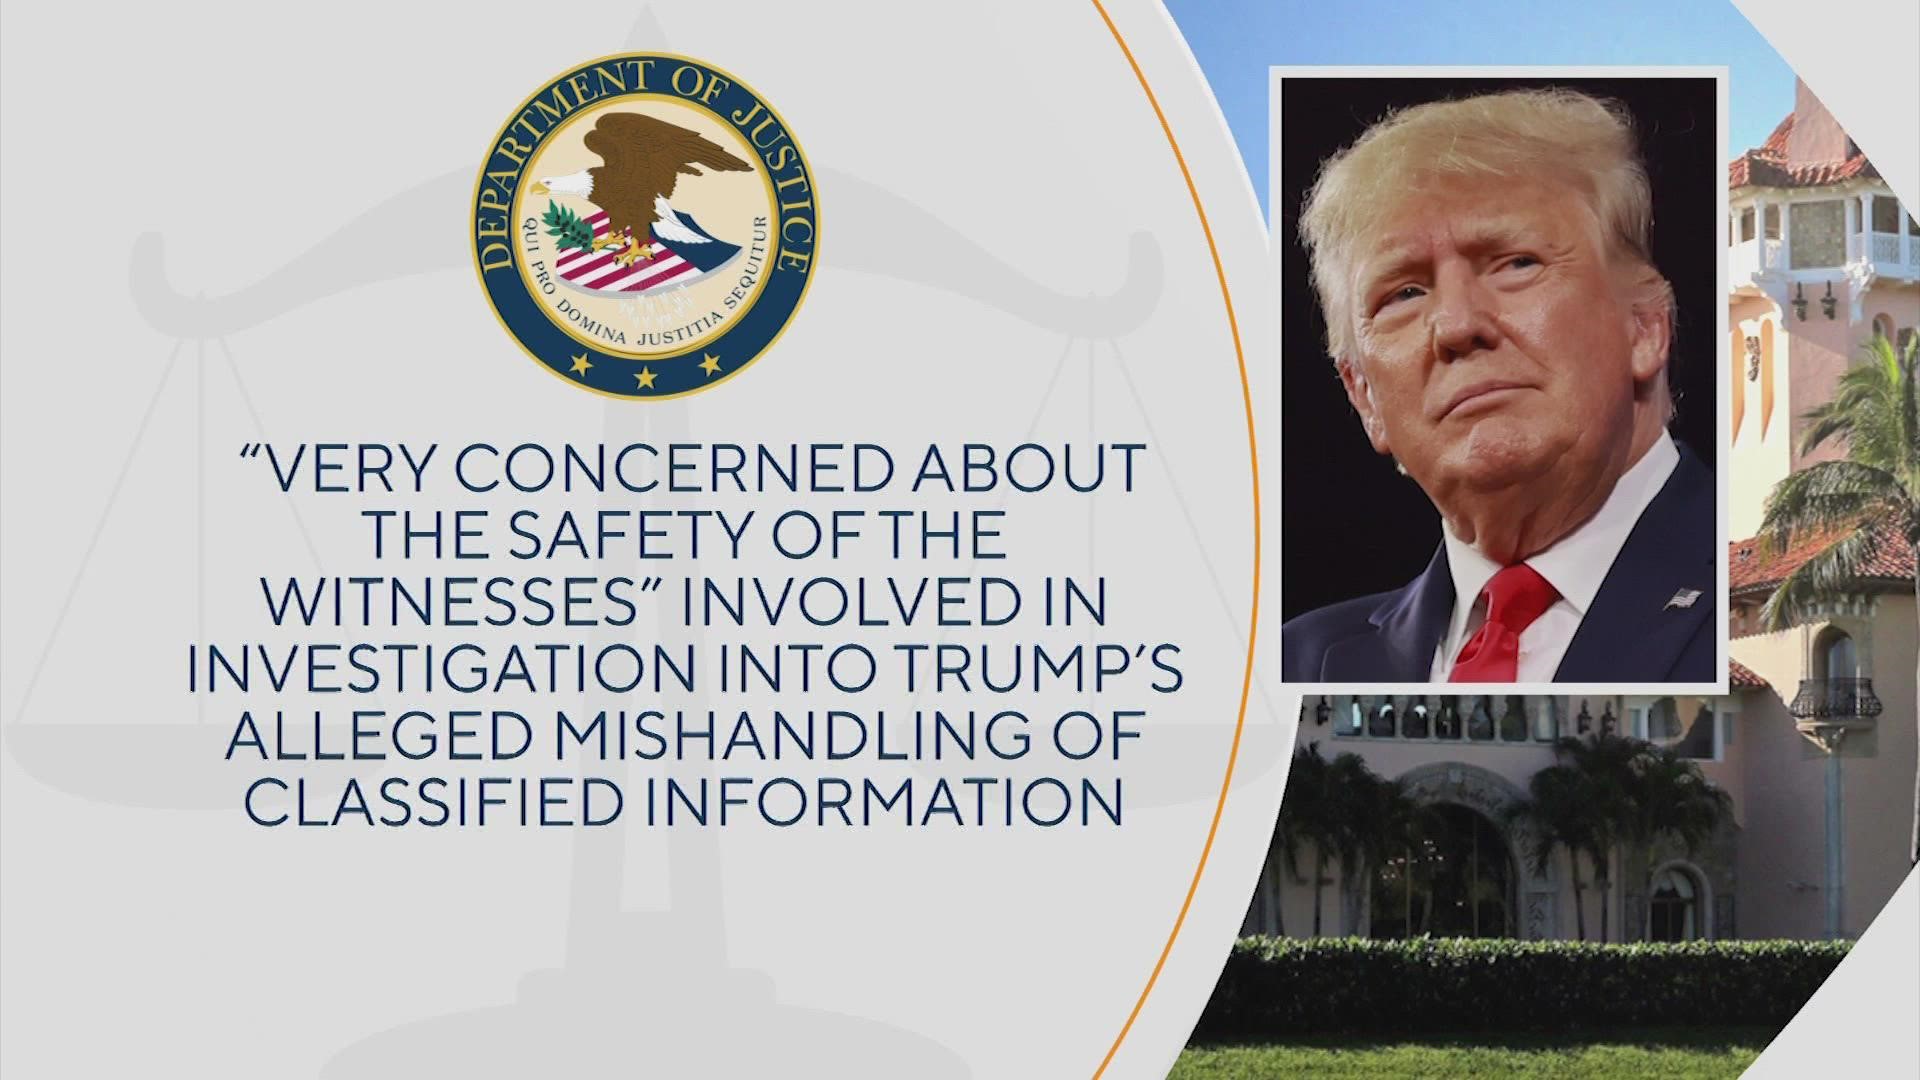 Much of the 38-page document is blacked out, the DOJ said, to protect the identity and safety of witnesses involved in the investigation of Trump.